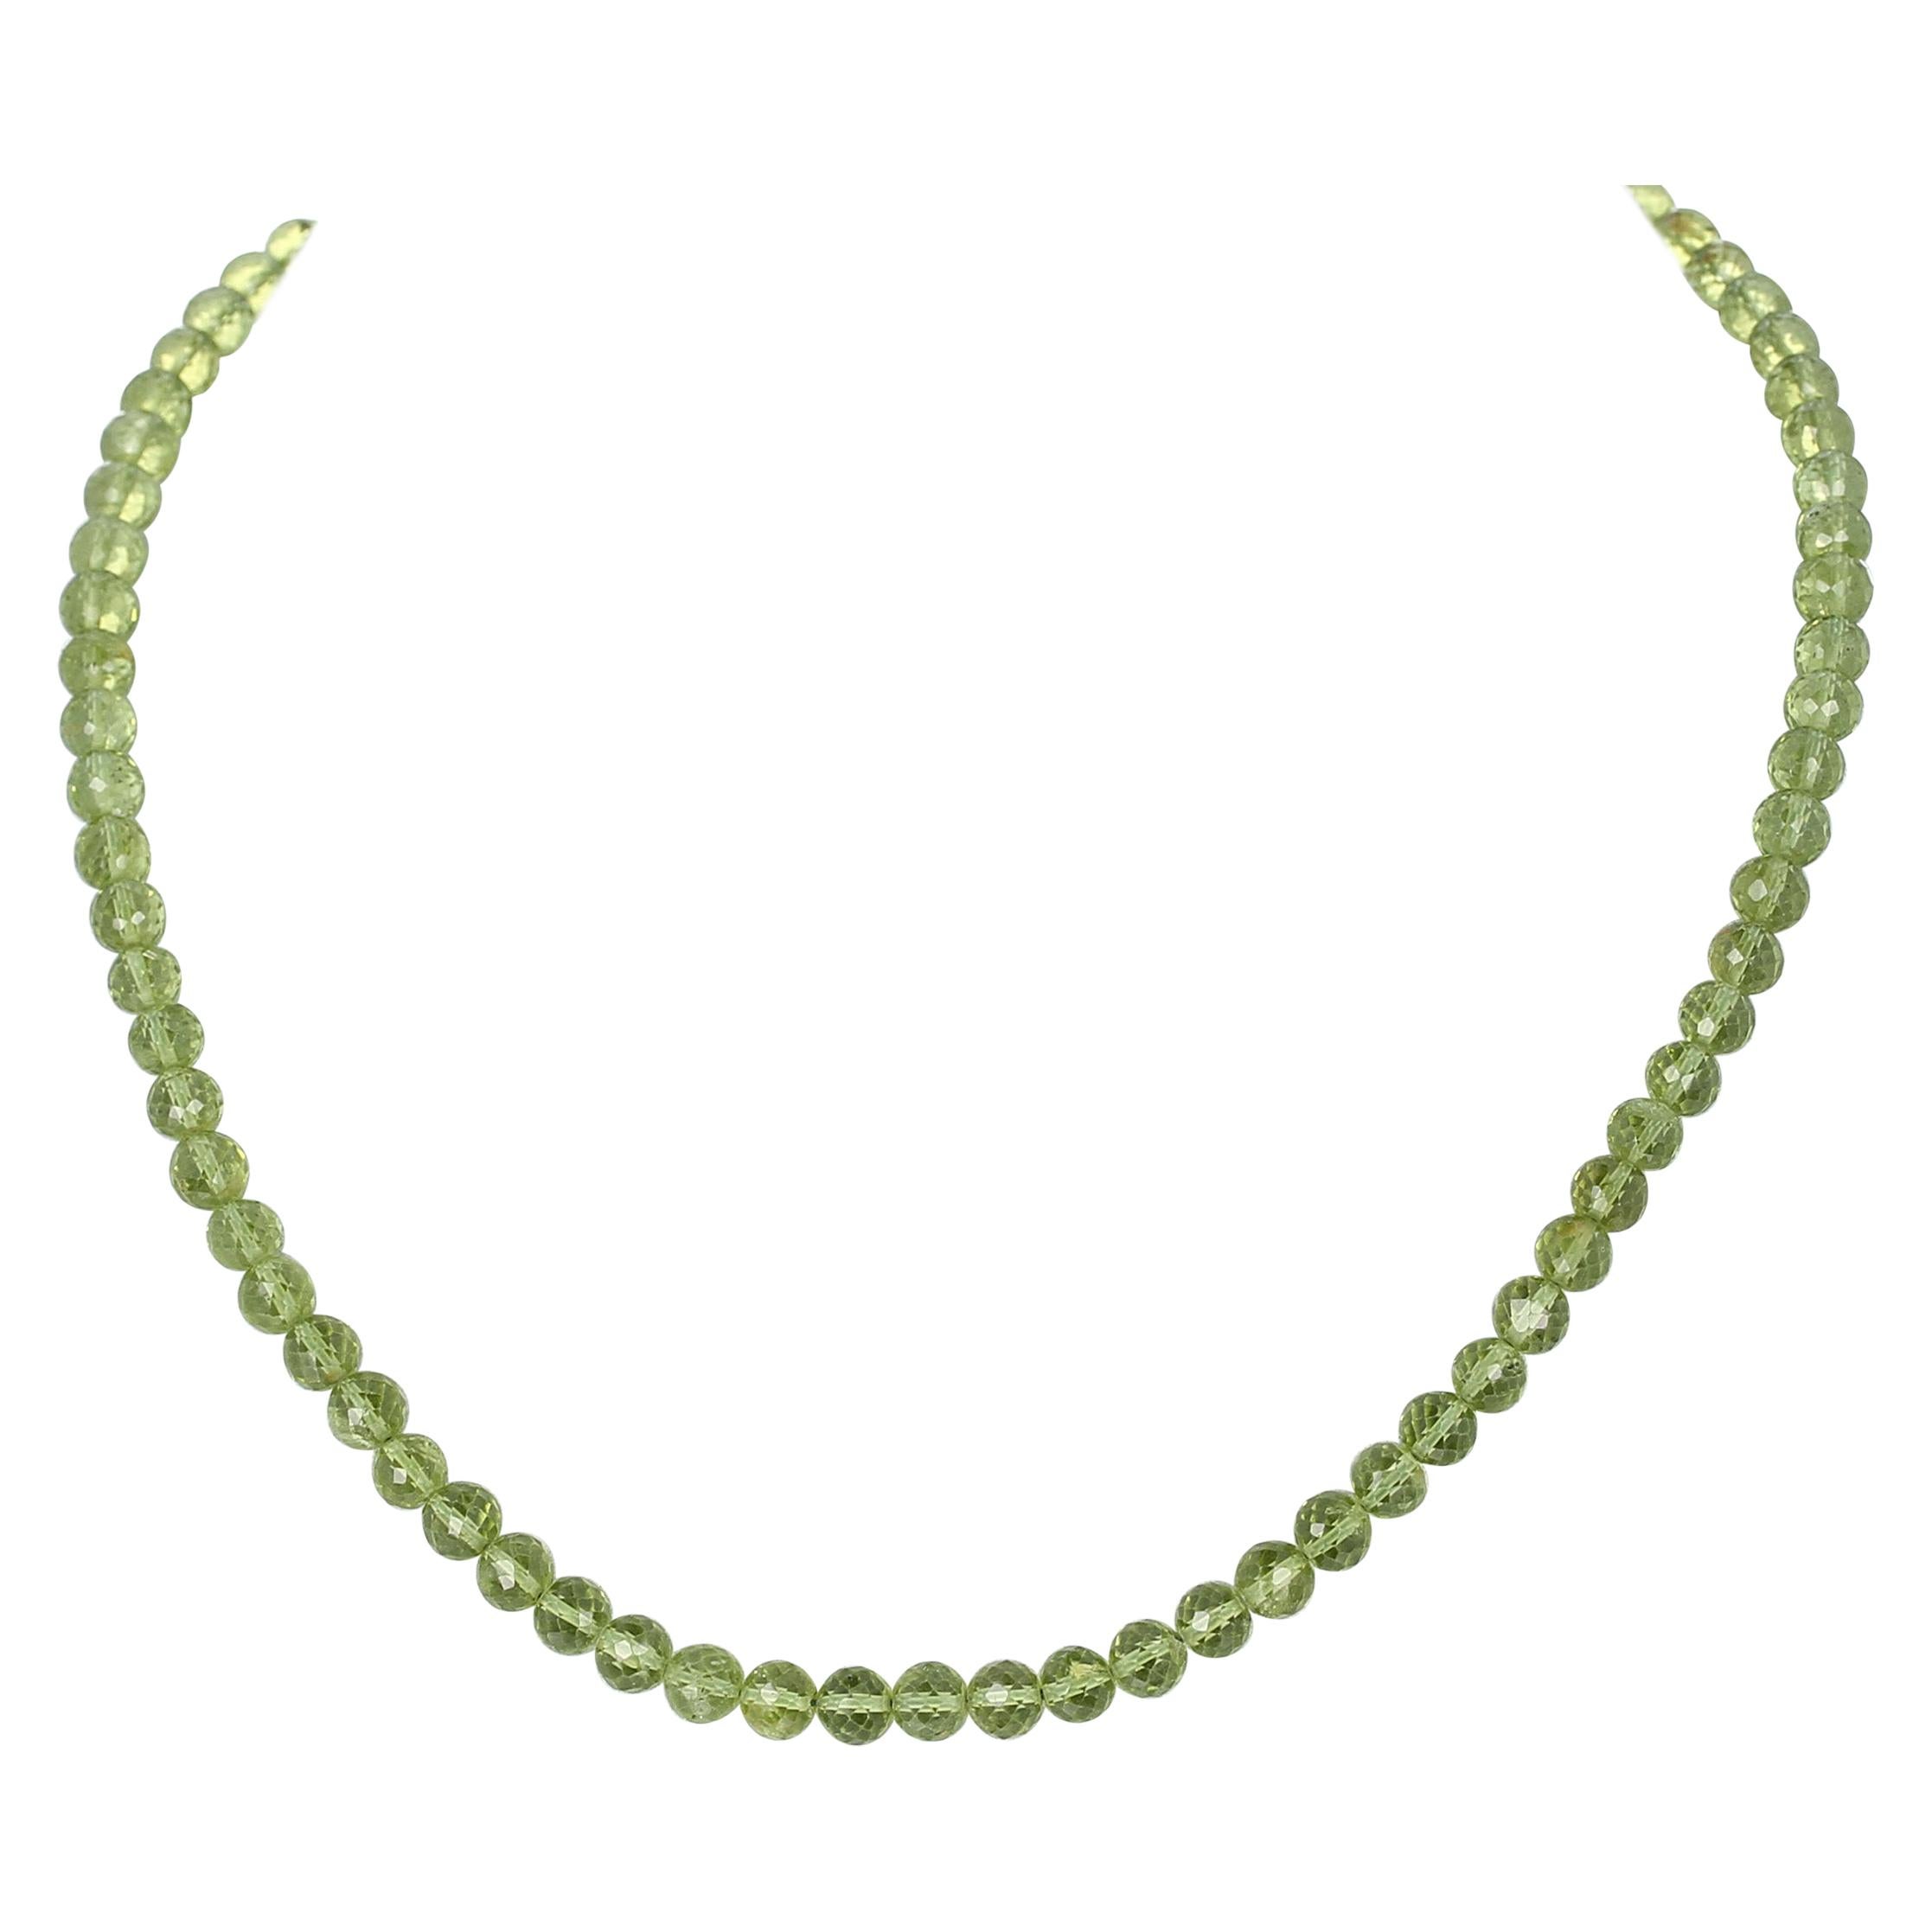 Peridot Faceted Round Beads Necklace, Toggle Clasp